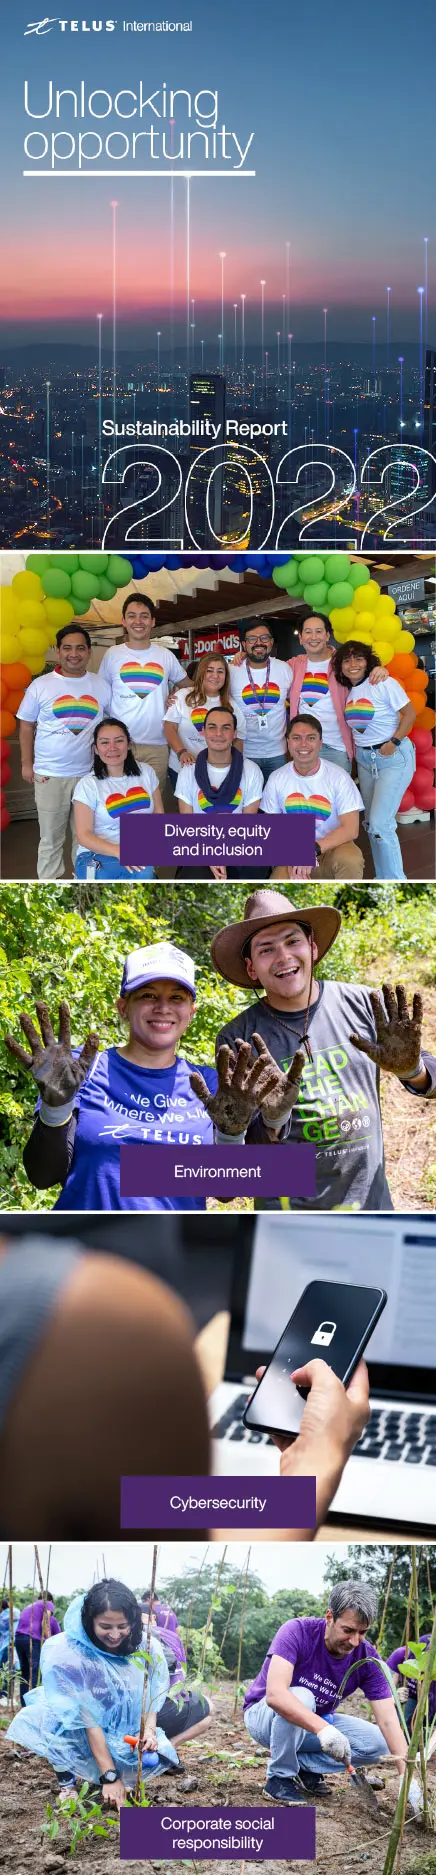 The cover of TELUS International's 2022 Sustainability Report titled "Unlocking opportunity." Beside the cover is an image of a group of people attending a pride event with text "Diversity, equity and inclusion" overlaid. Beside this image is a photo of two people volunteering with text "Environment" overlaid. Beside this image is a photo of someone using their cellphone and there is a picture of a locked padlock on the screen. The text "Cybersecurity" is overlaid. Beside this image is a photo of people planting trees with the text "corporate social responsibility" overlaid. 